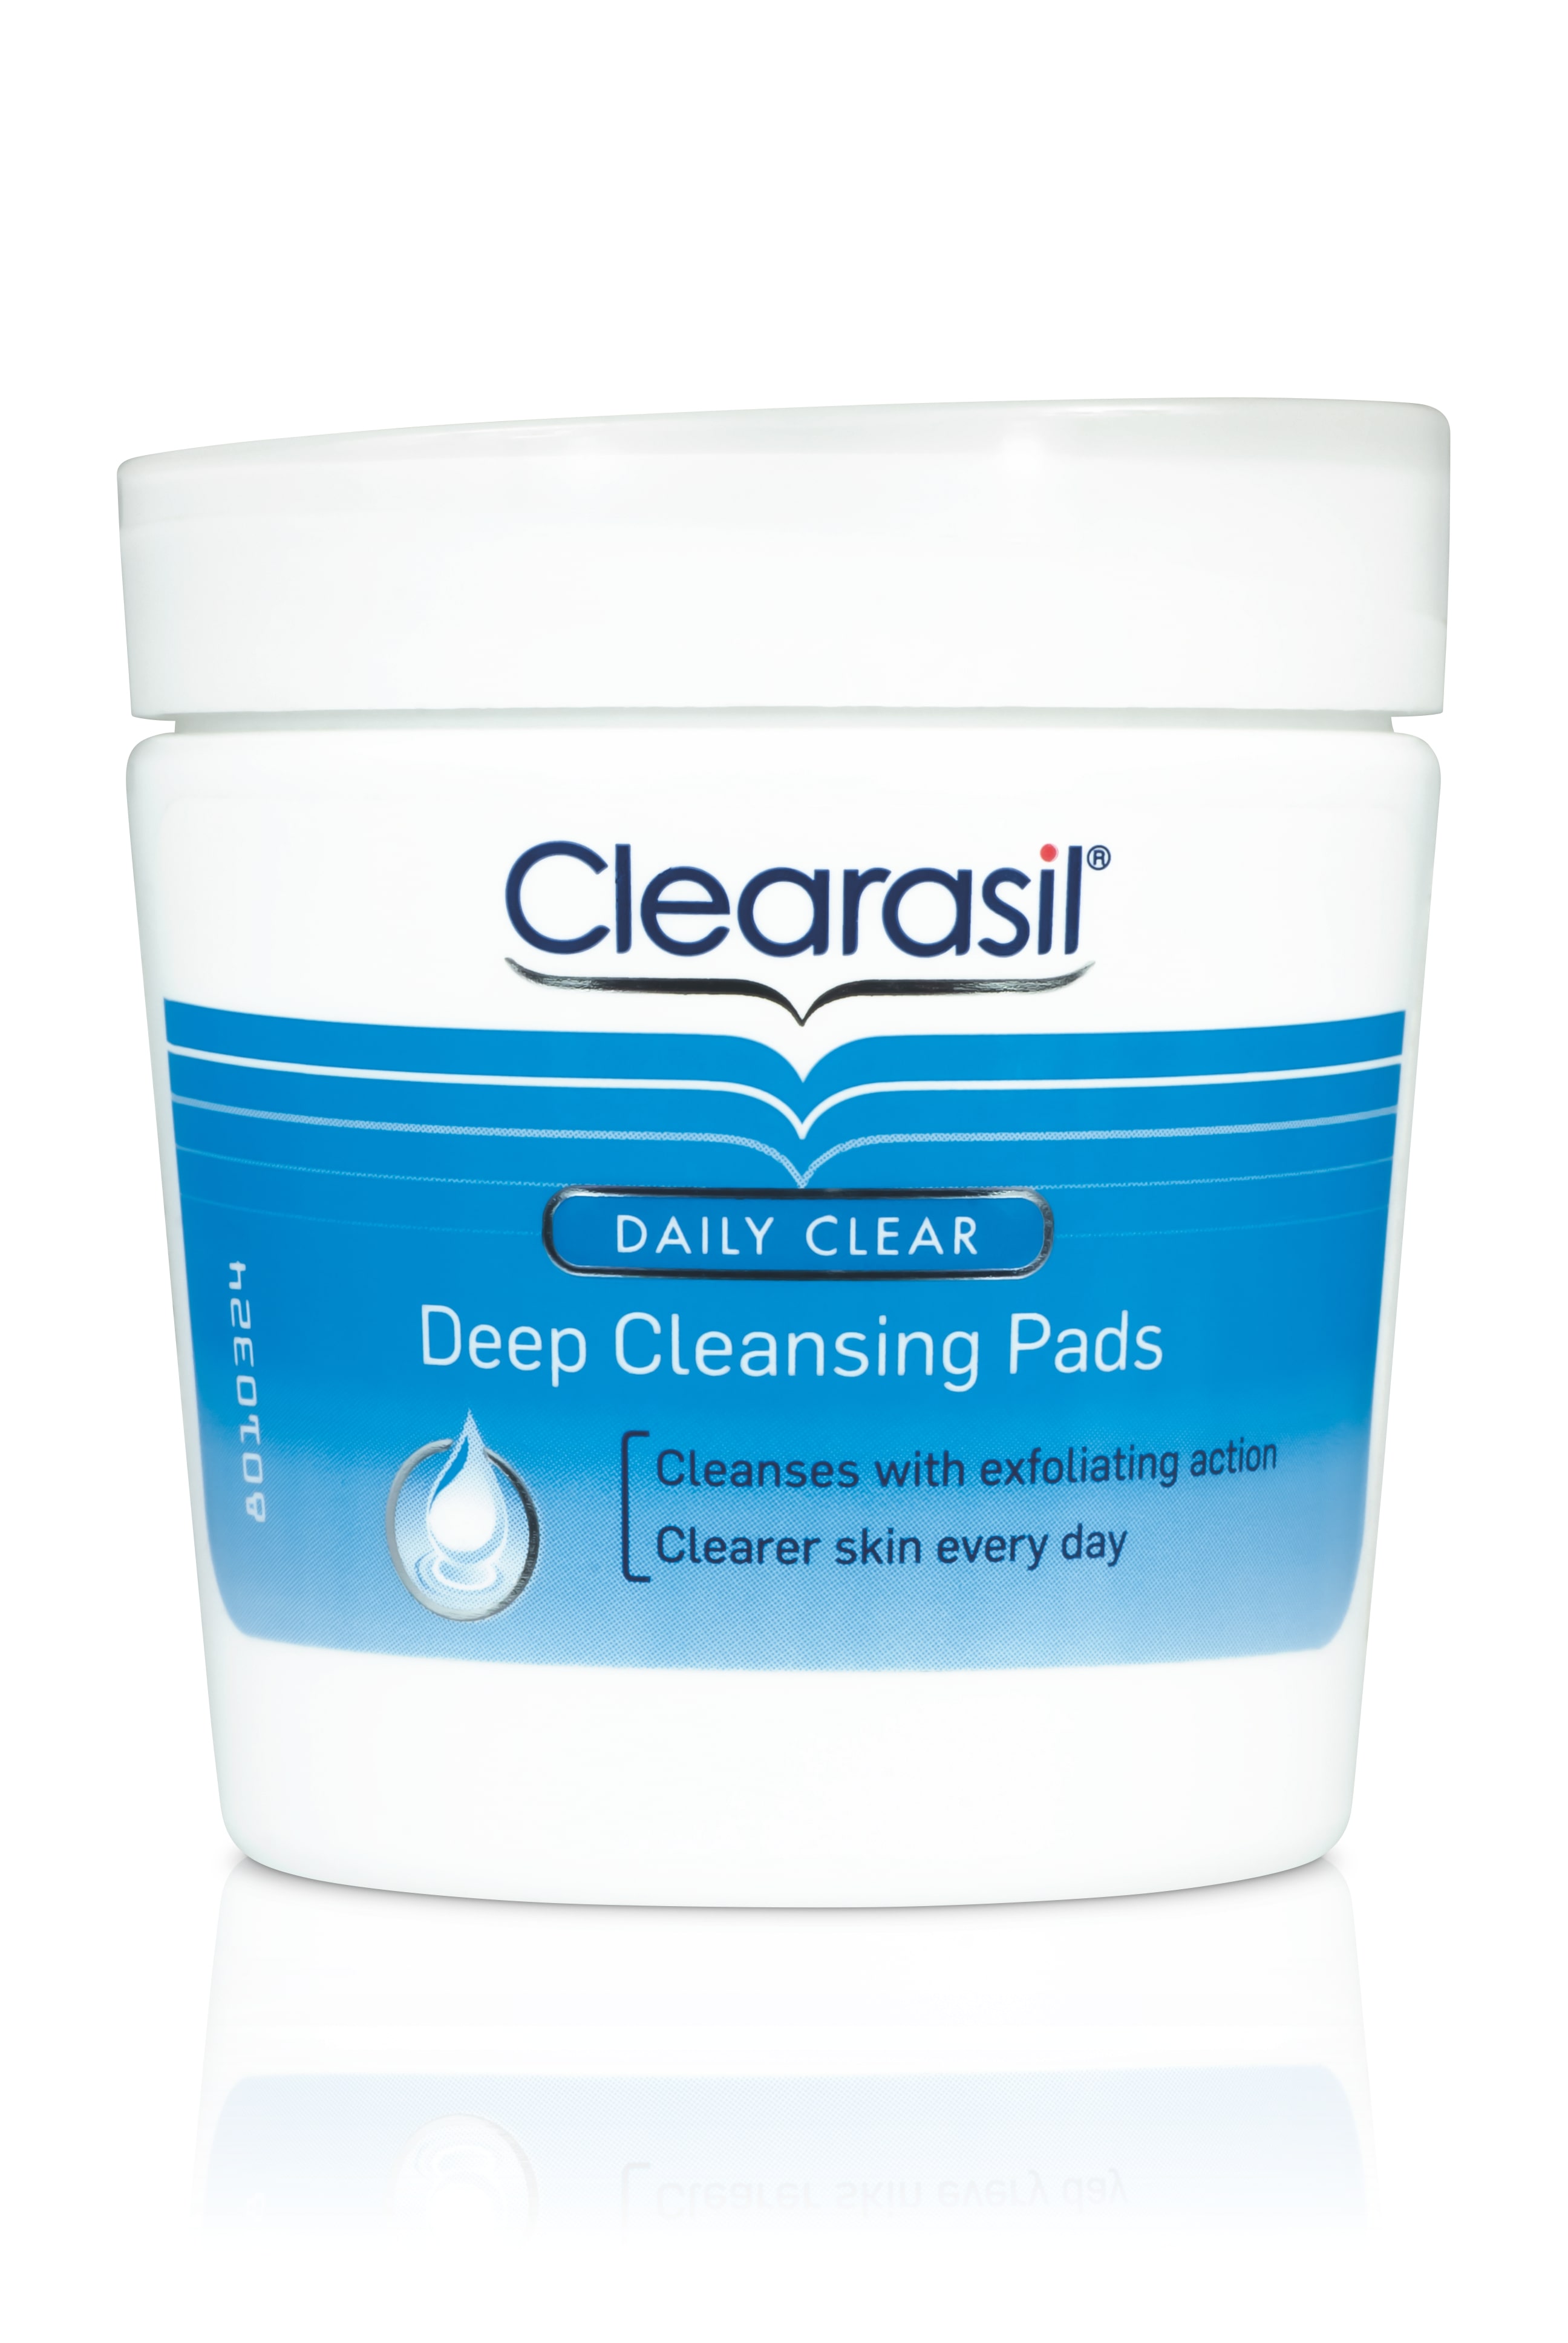 Clearasil Daily Clear Deep Cleansing Pads 65 st